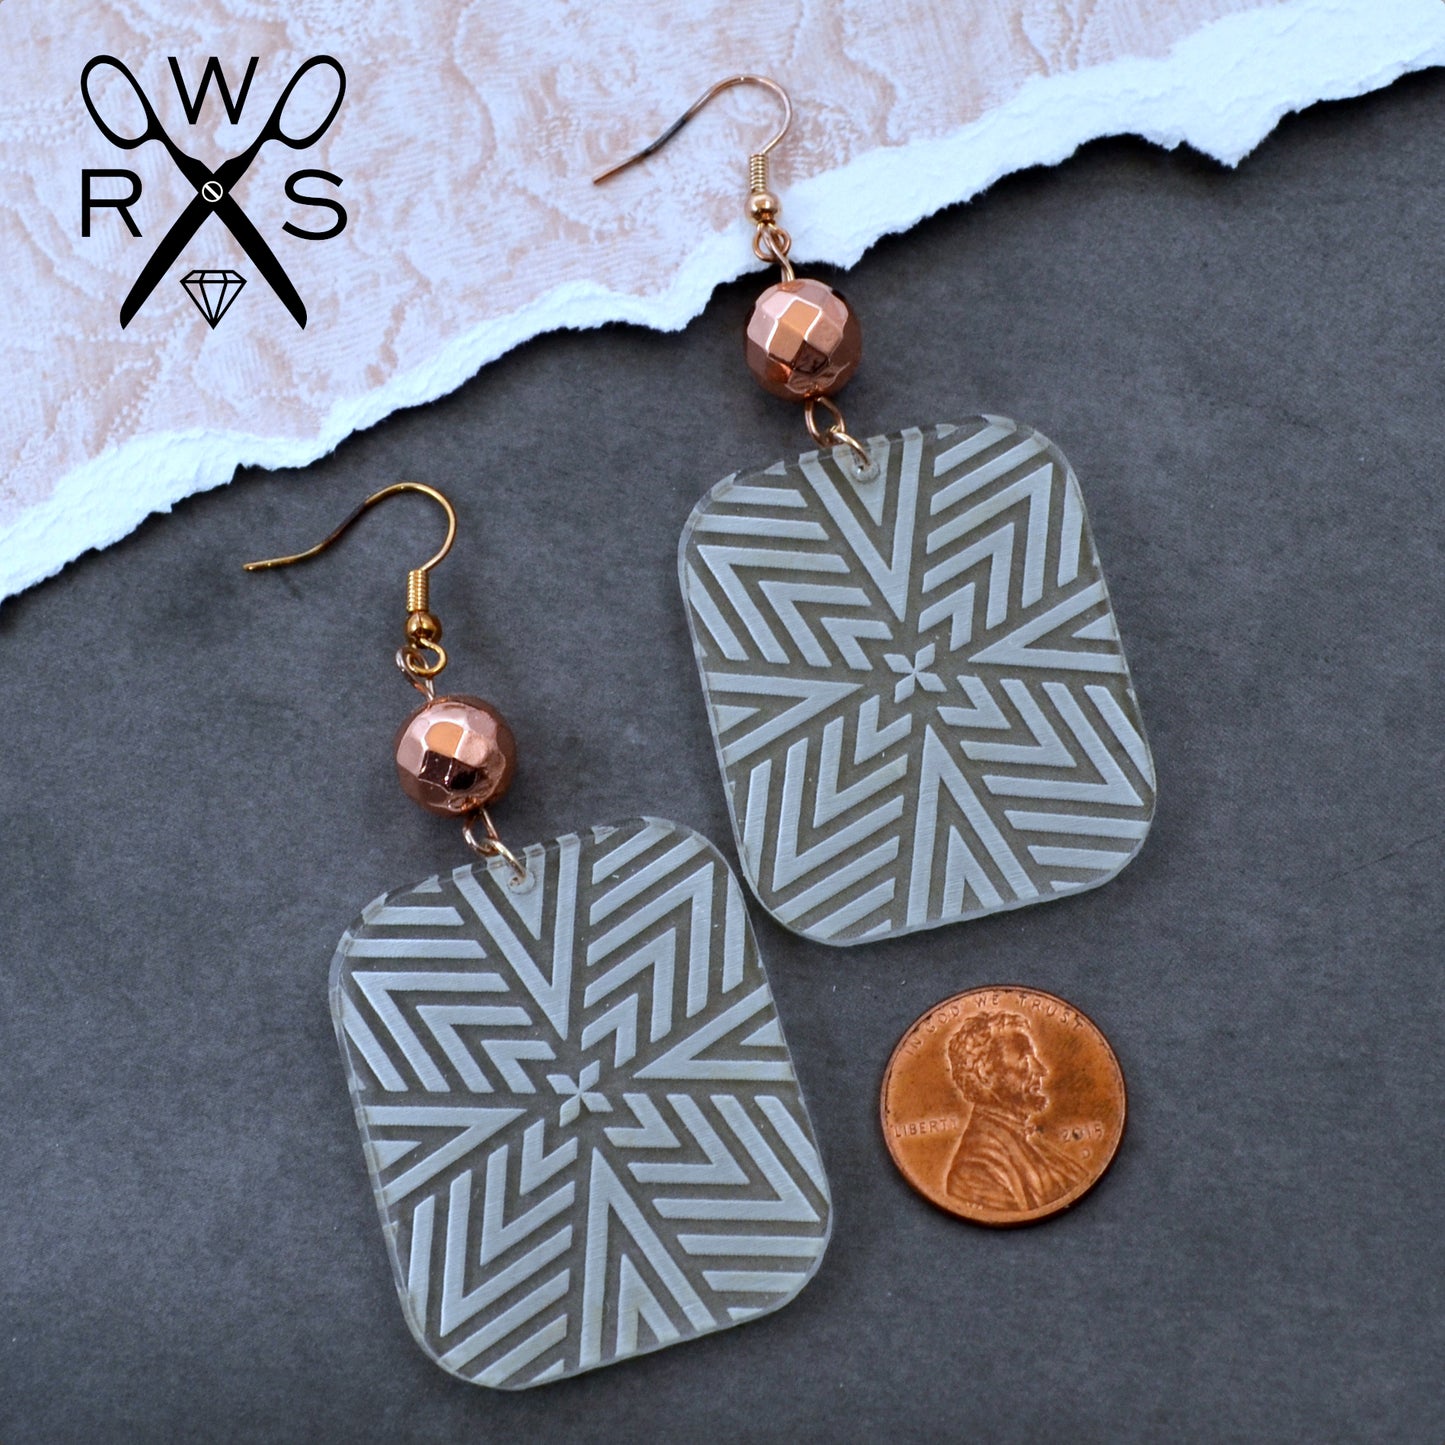 SALE Geometric Starburst Dangles in Clear and Rose Gold - Laser Cut Acrylic Dangle Earrings